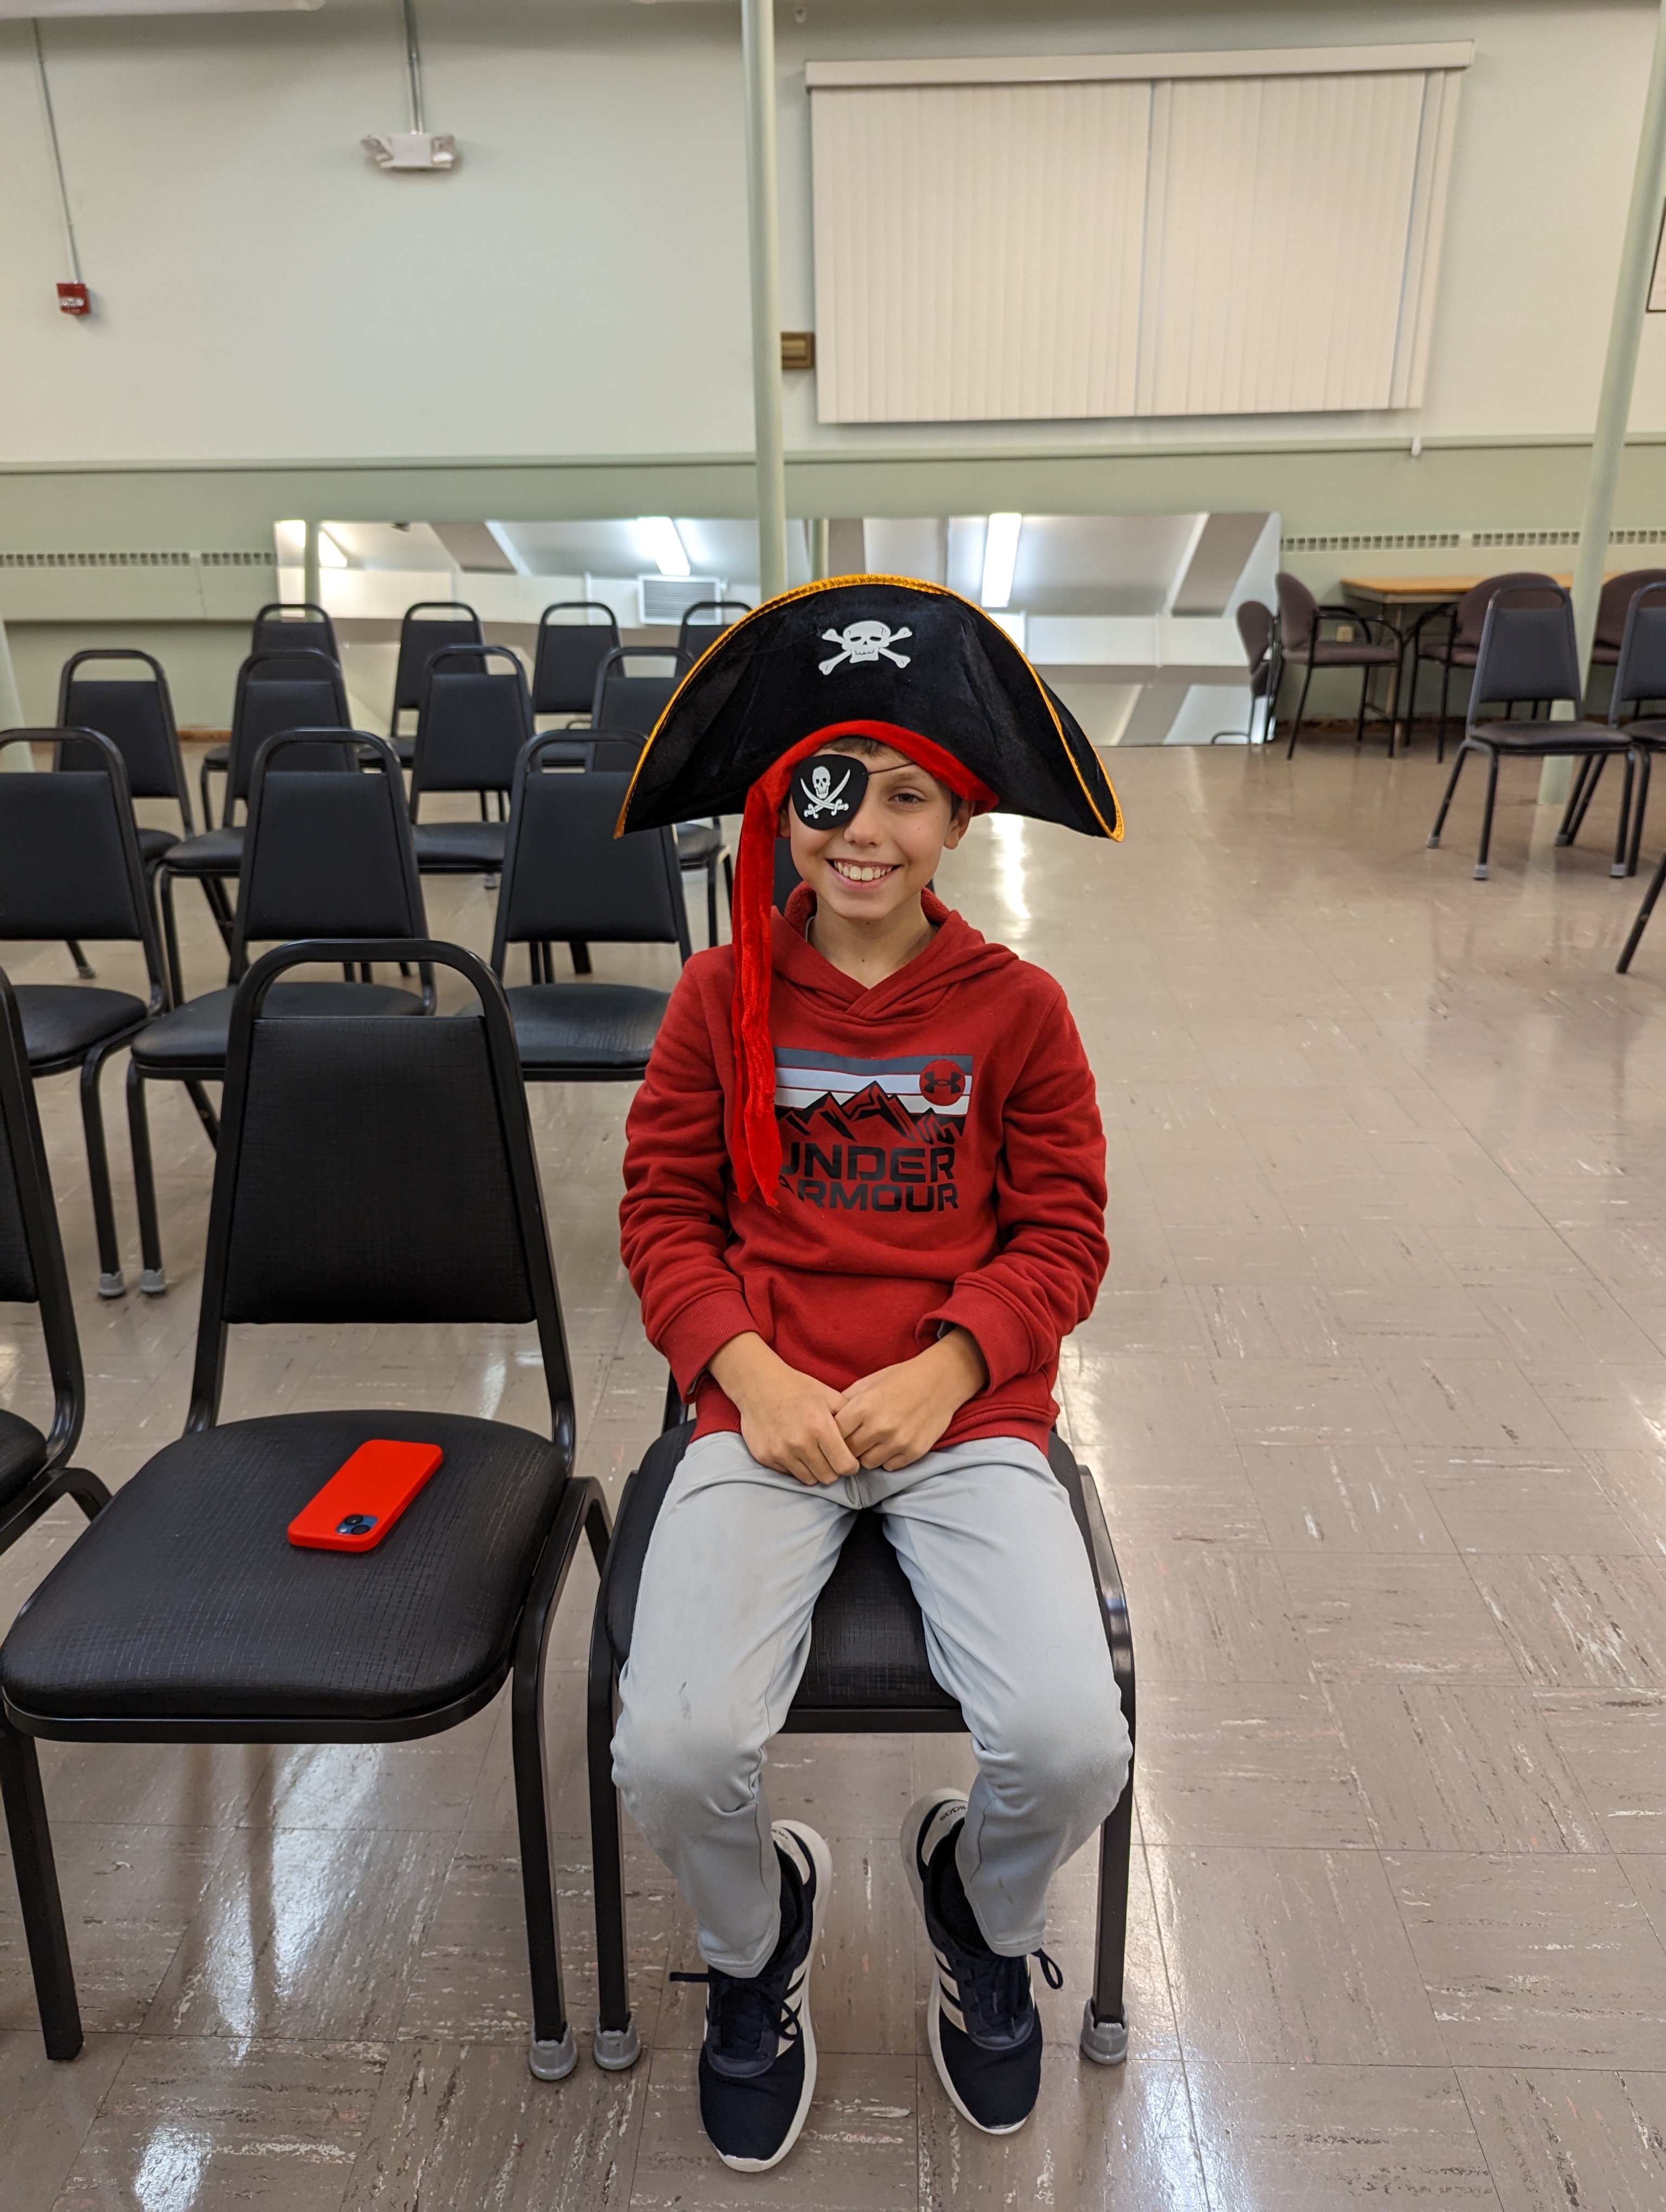 Explore the Whydah Young Pirate